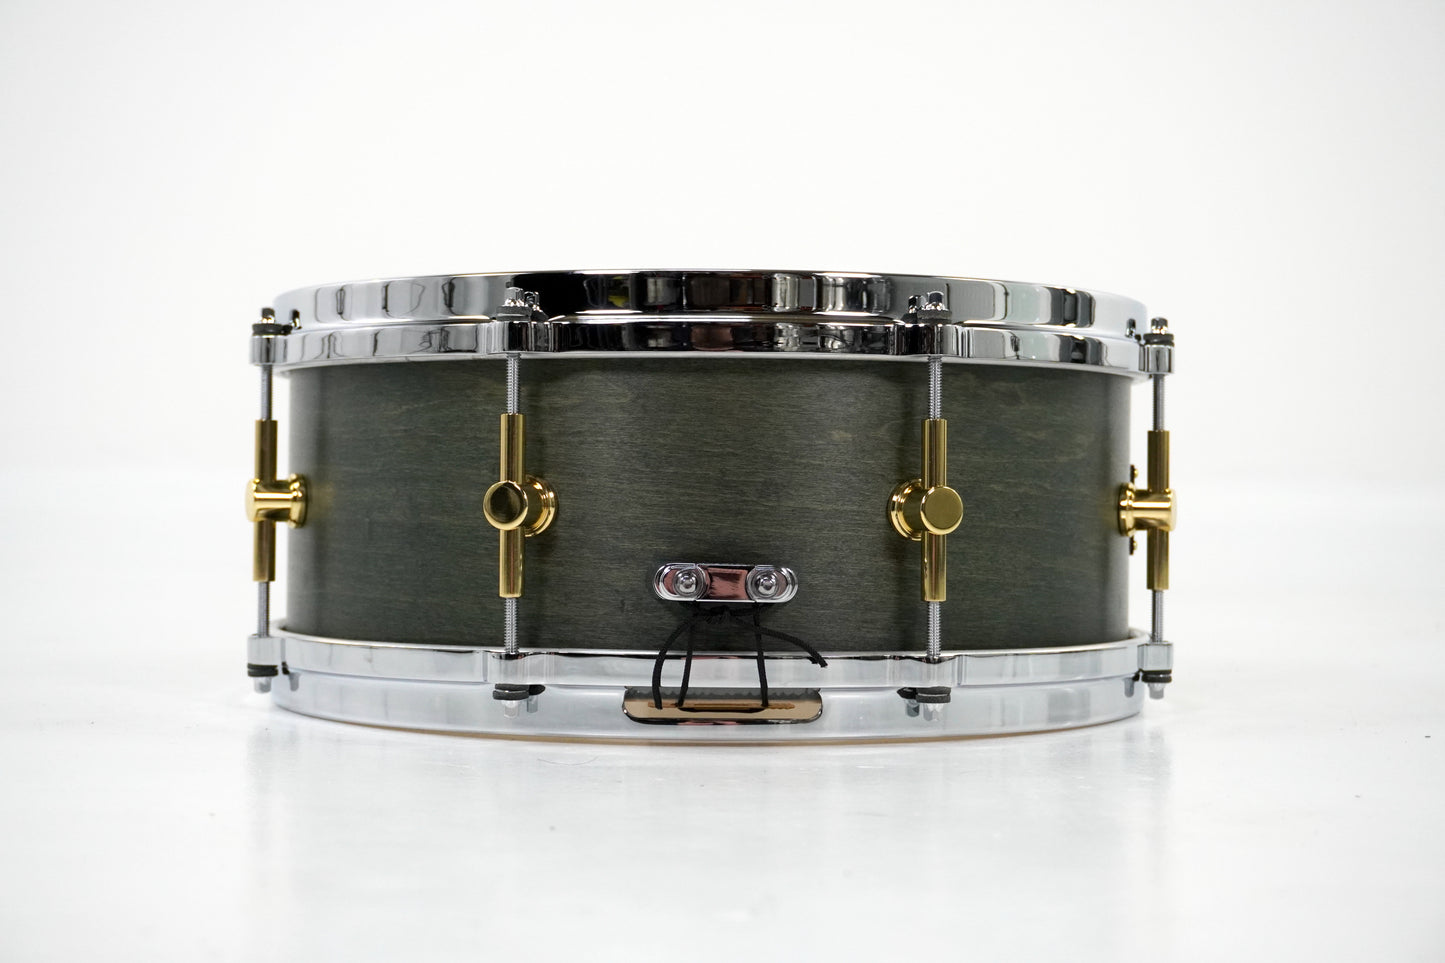 Canopus 14 x 5.5” 10ply Maple Snare Drum in Black Olive Oil